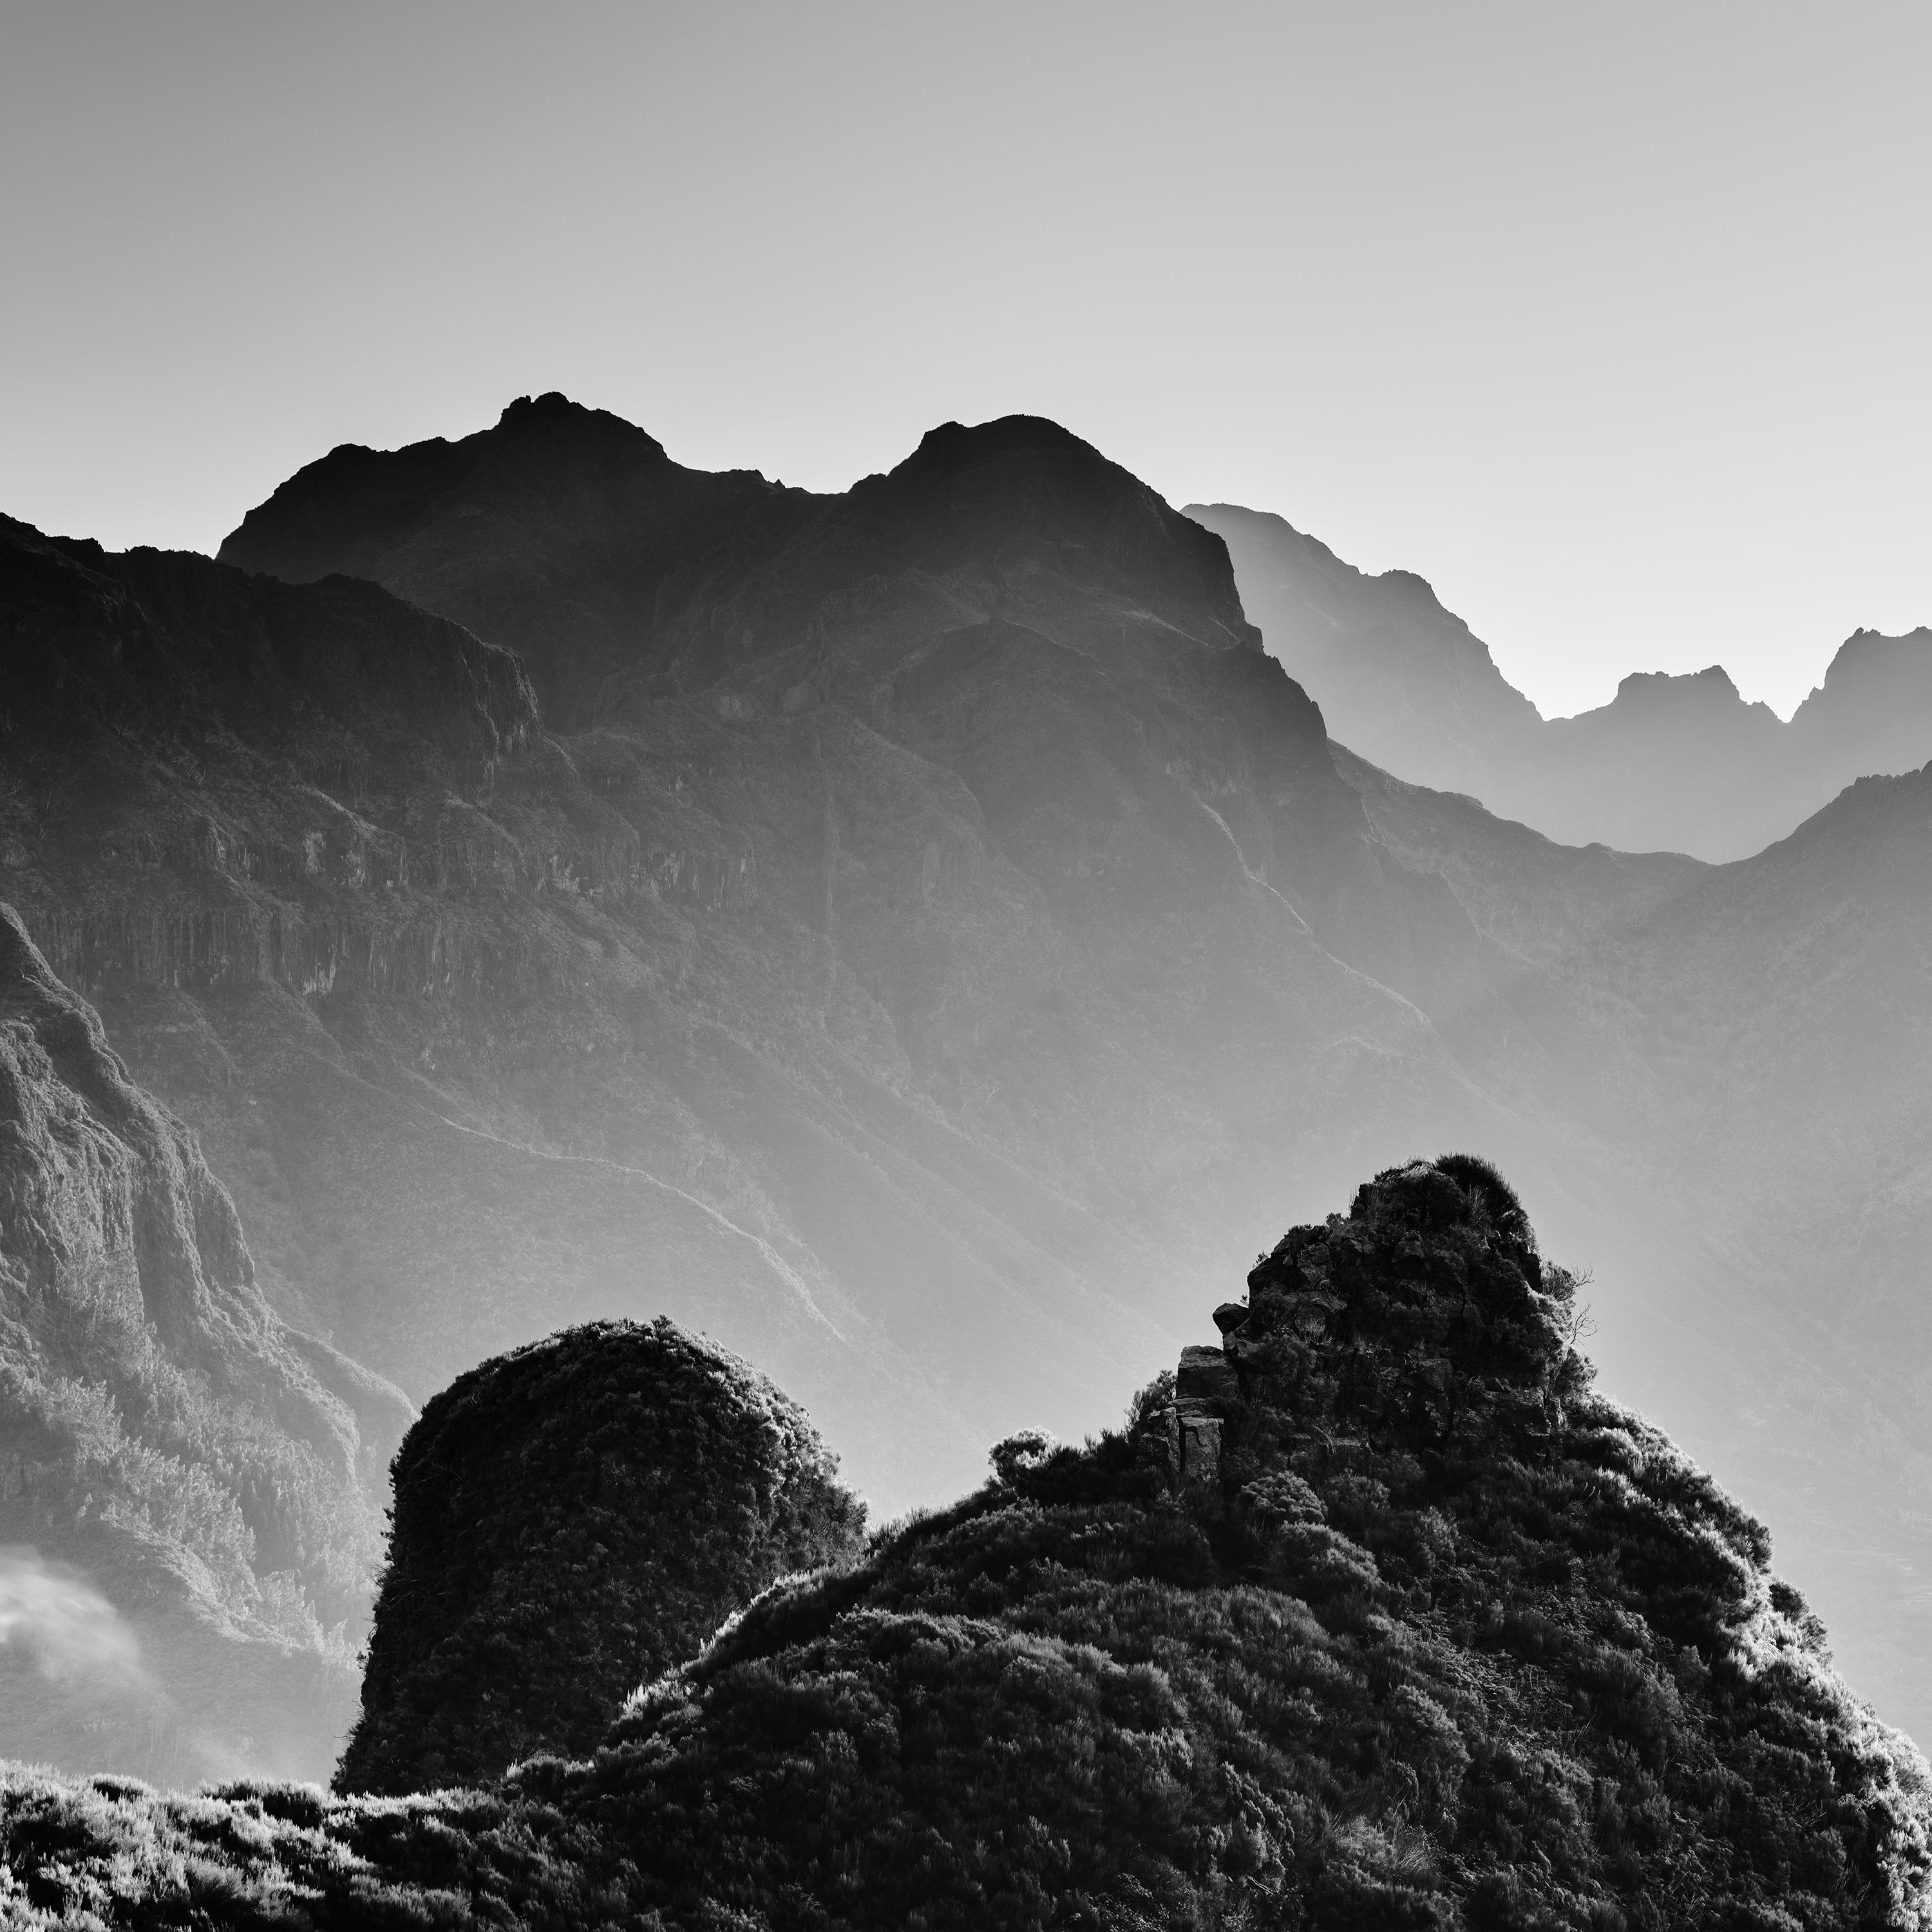 Black and White Fine Art Landscape photography. Mountain silhouette at sunrise in the mountains of Madeira, Portugal. Archival pigment ink print, edition of 9. Signed, titled, dated and numbered by artist. Certificate of authenticity included.